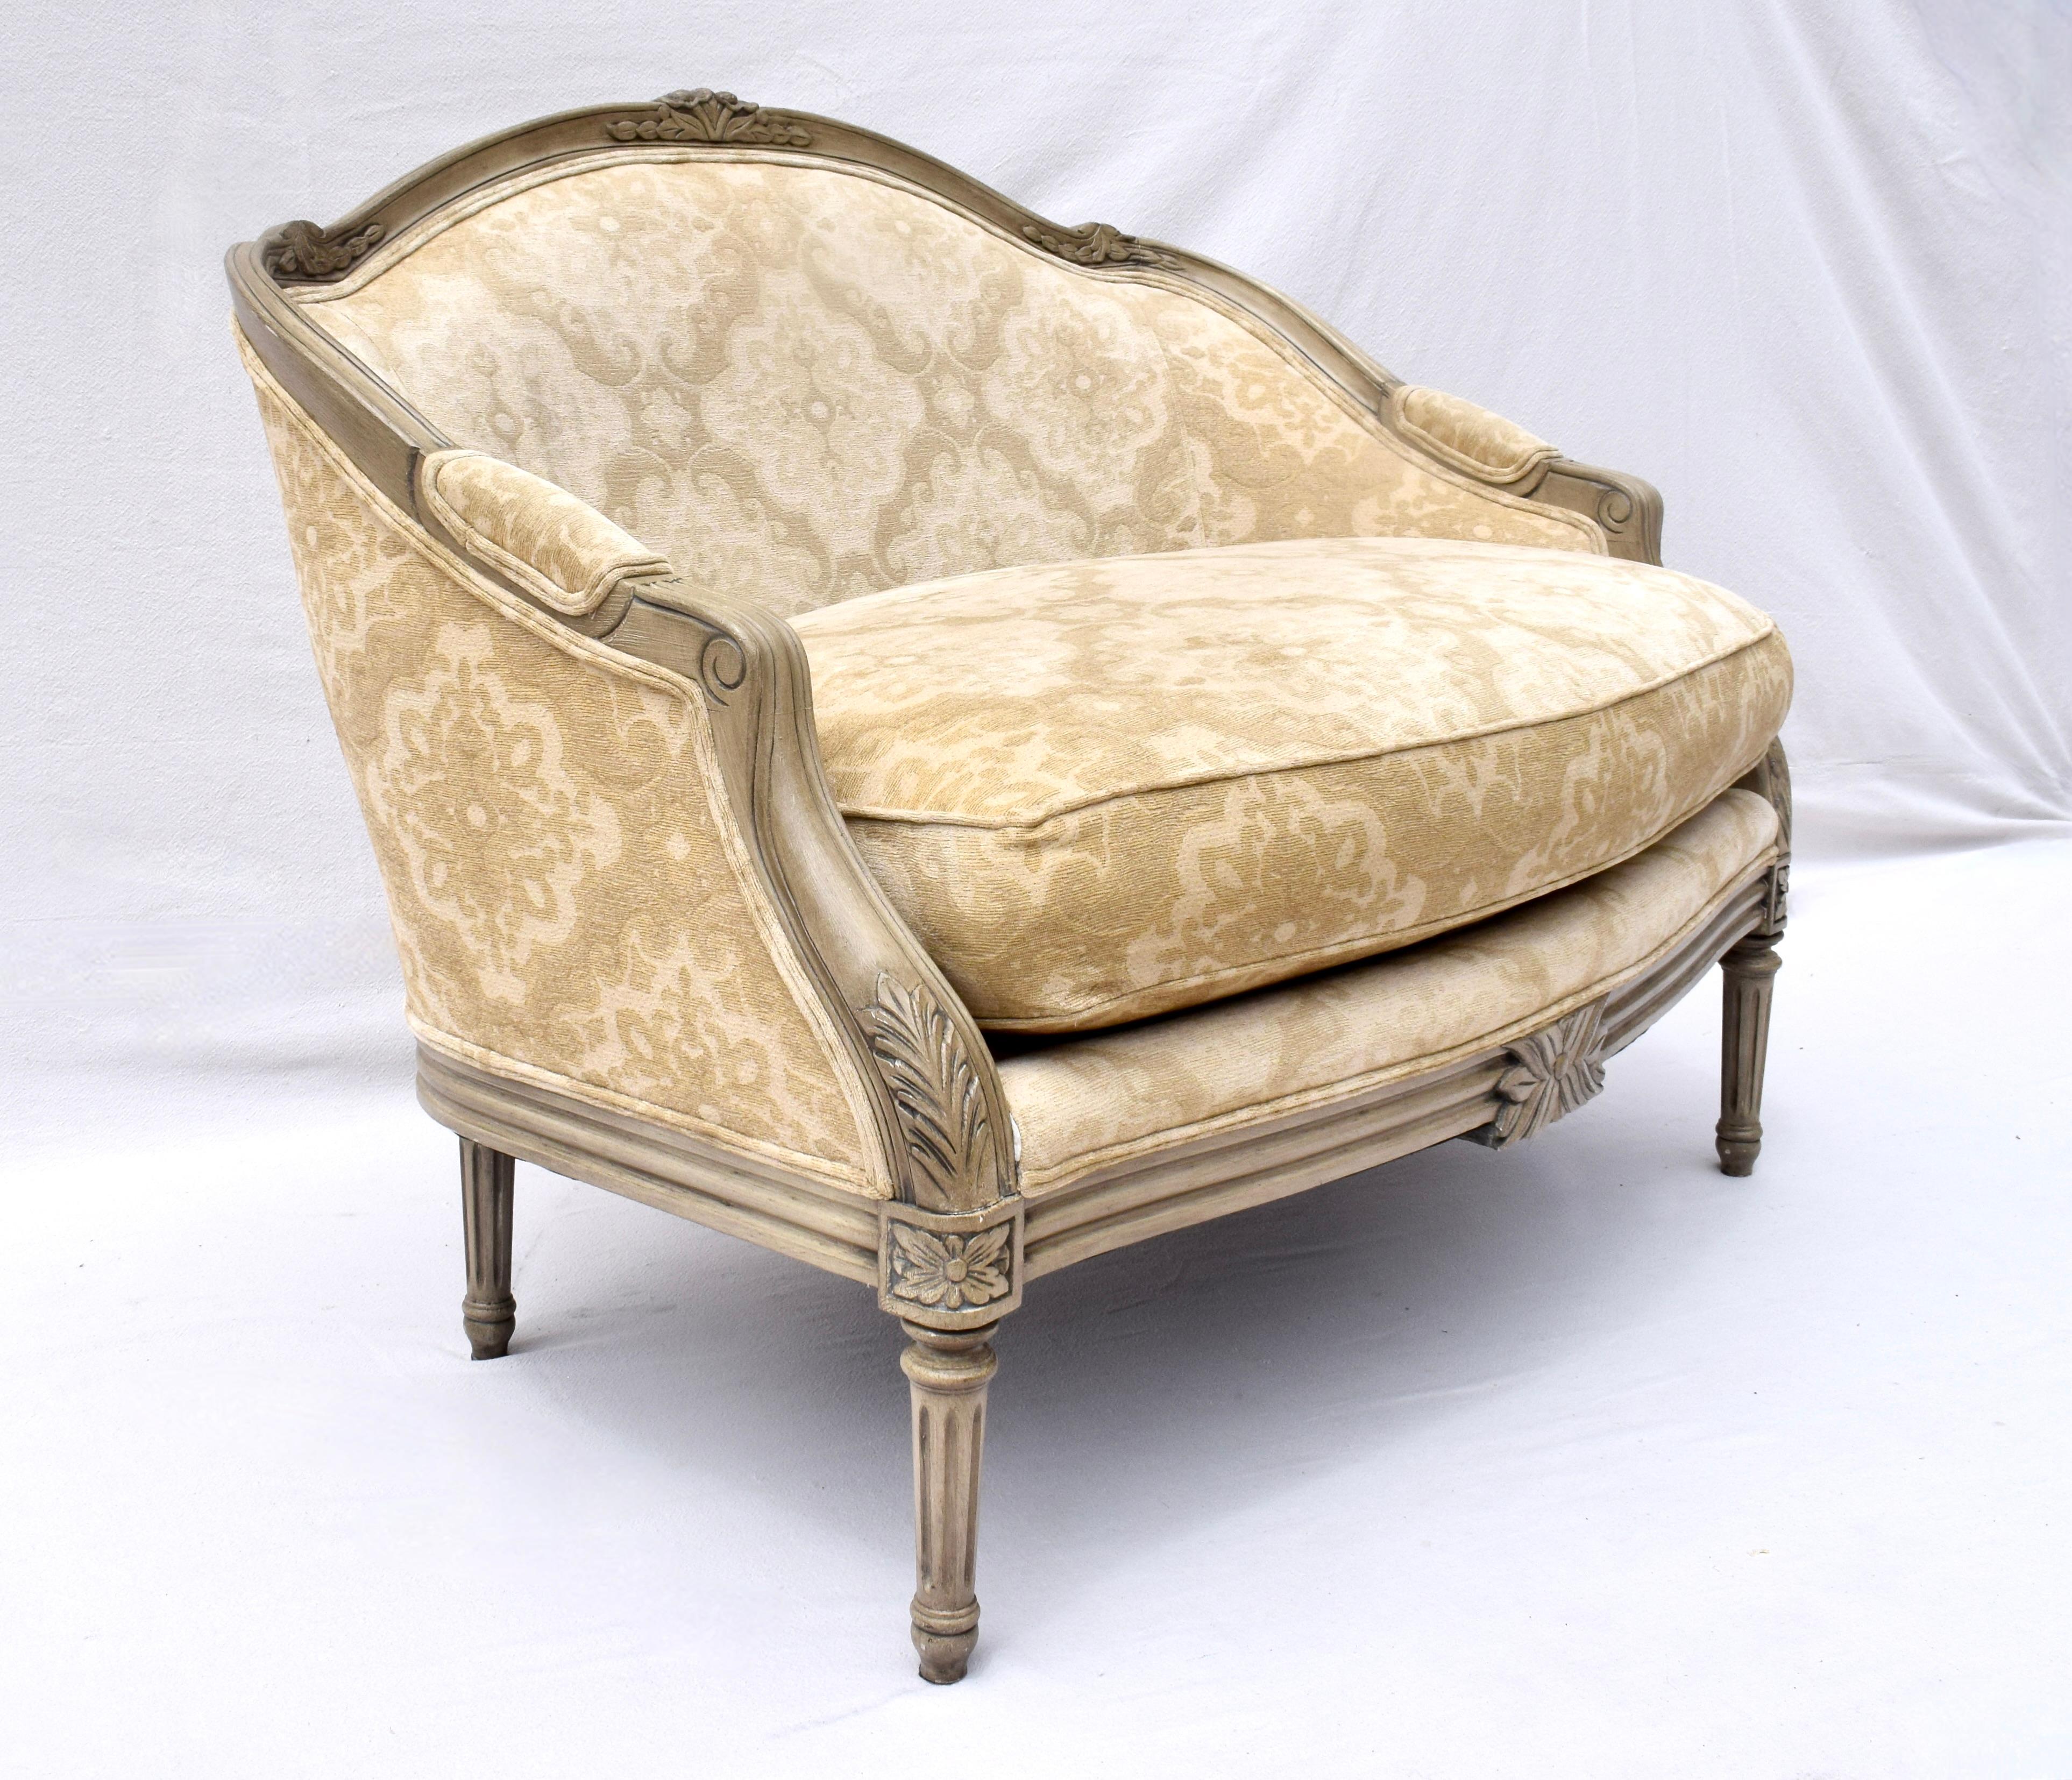 Carved French Louis XvI Style Marquise Chair & Ottoman For Sale